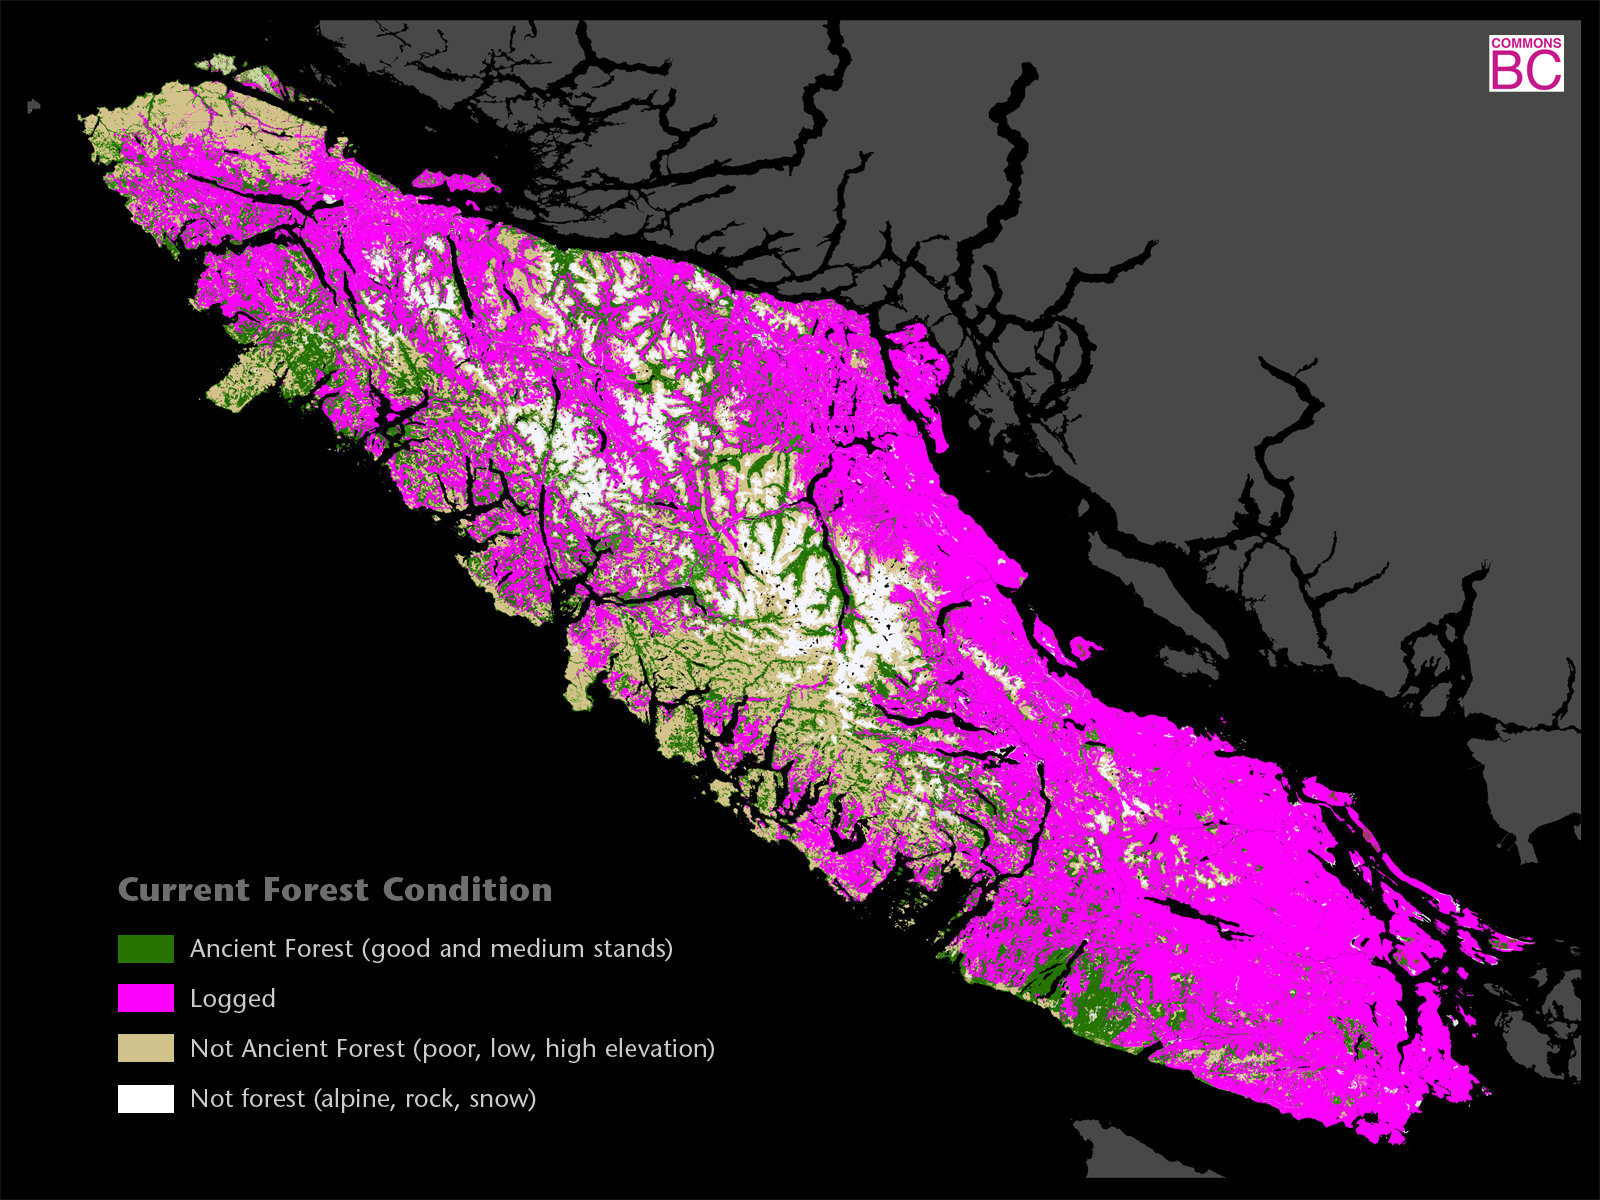 Logged areas of Vancouver Island - Map supplied by Commons BC 